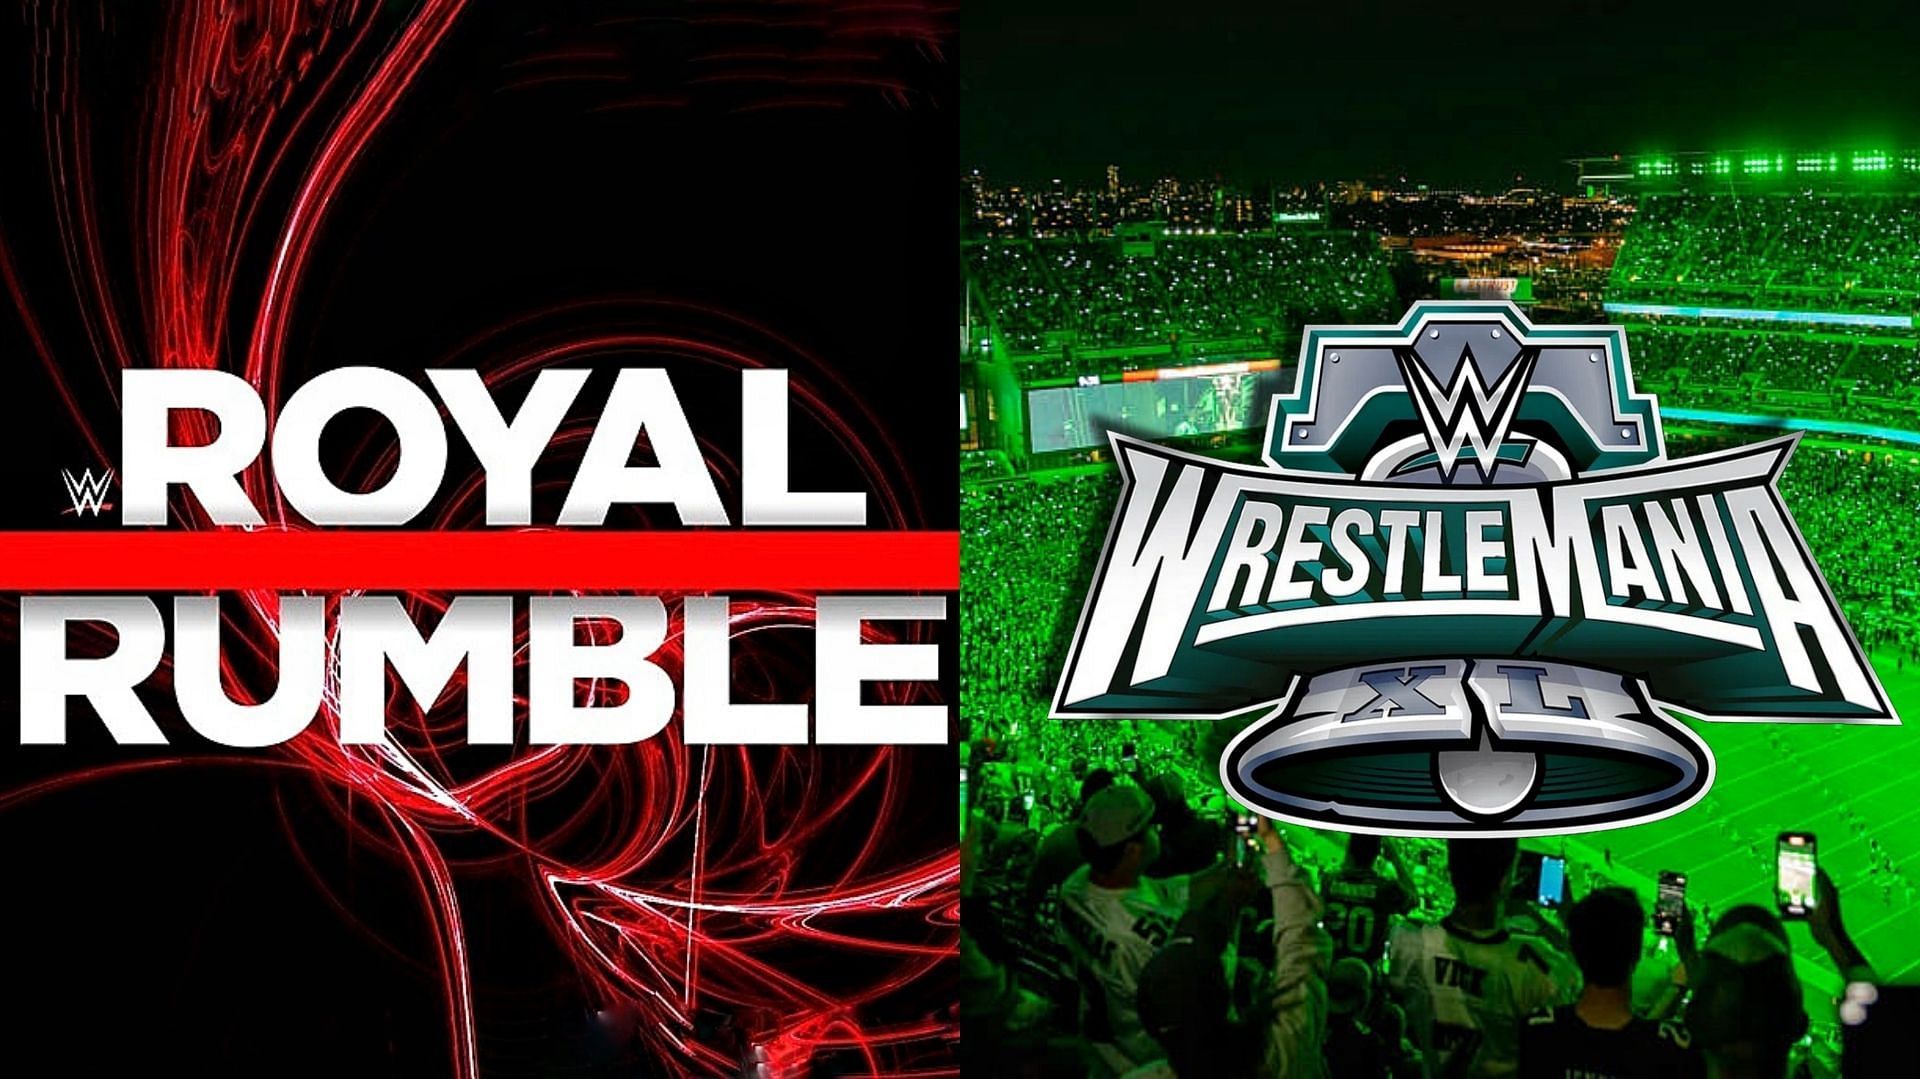 Royal Rumble begins the Road to WrestleMania